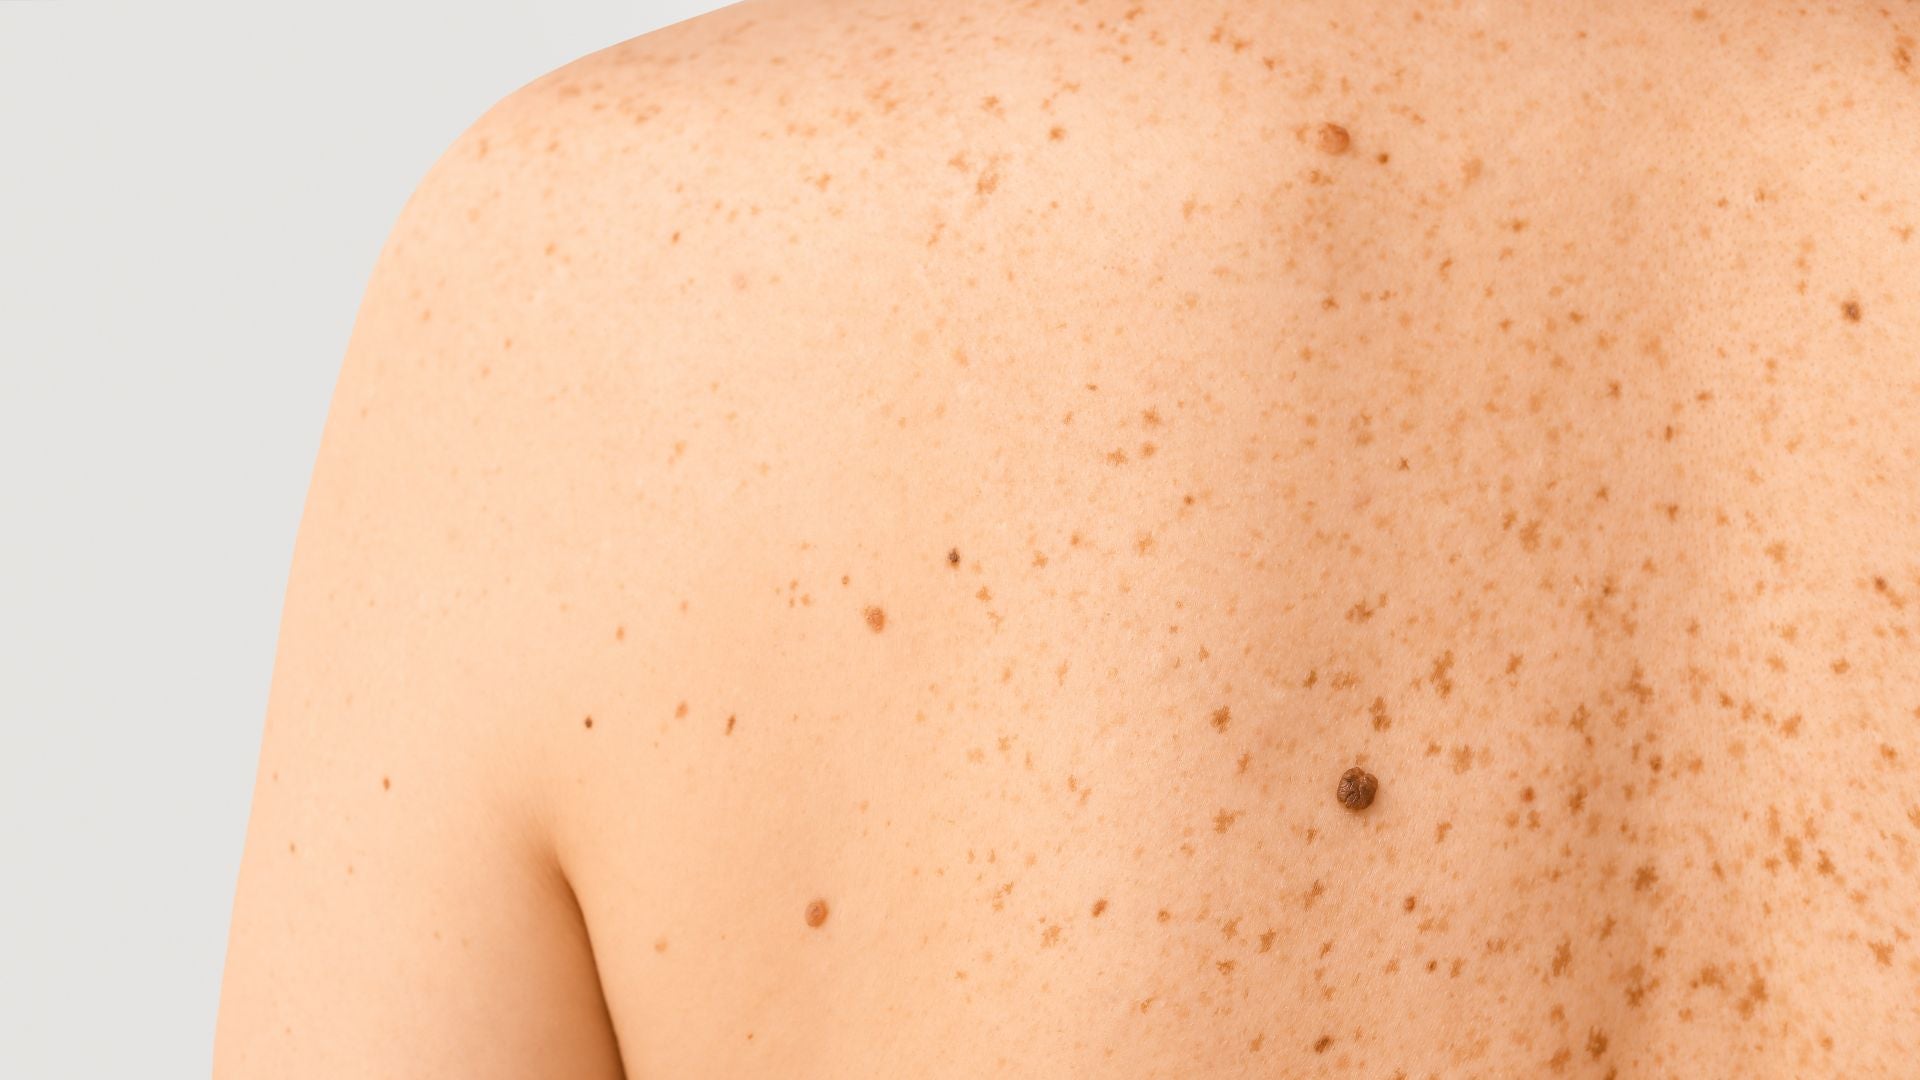 A person's back covered in moles